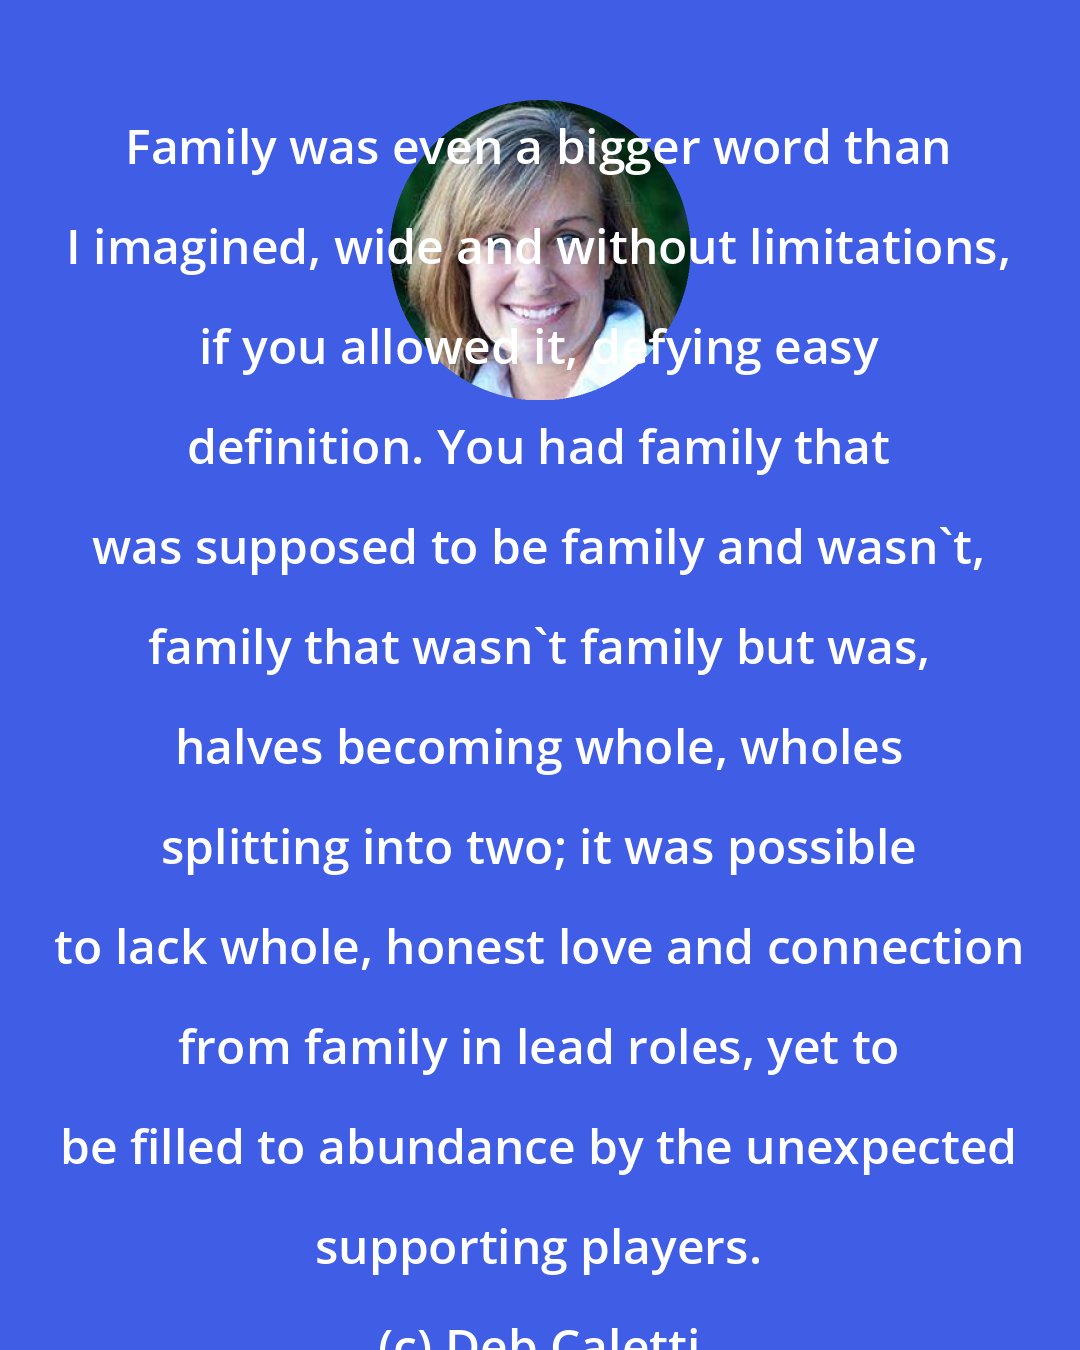 Deb Caletti: Family was even a bigger word than I imagined, wide and without limitations, if you allowed it, defying easy definition. You had family that was supposed to be family and wasn't, family that wasn't family but was, halves becoming whole, wholes splitting into two; it was possible to lack whole, honest love and connection from family in lead roles, yet to be filled to abundance by the unexpected supporting players.